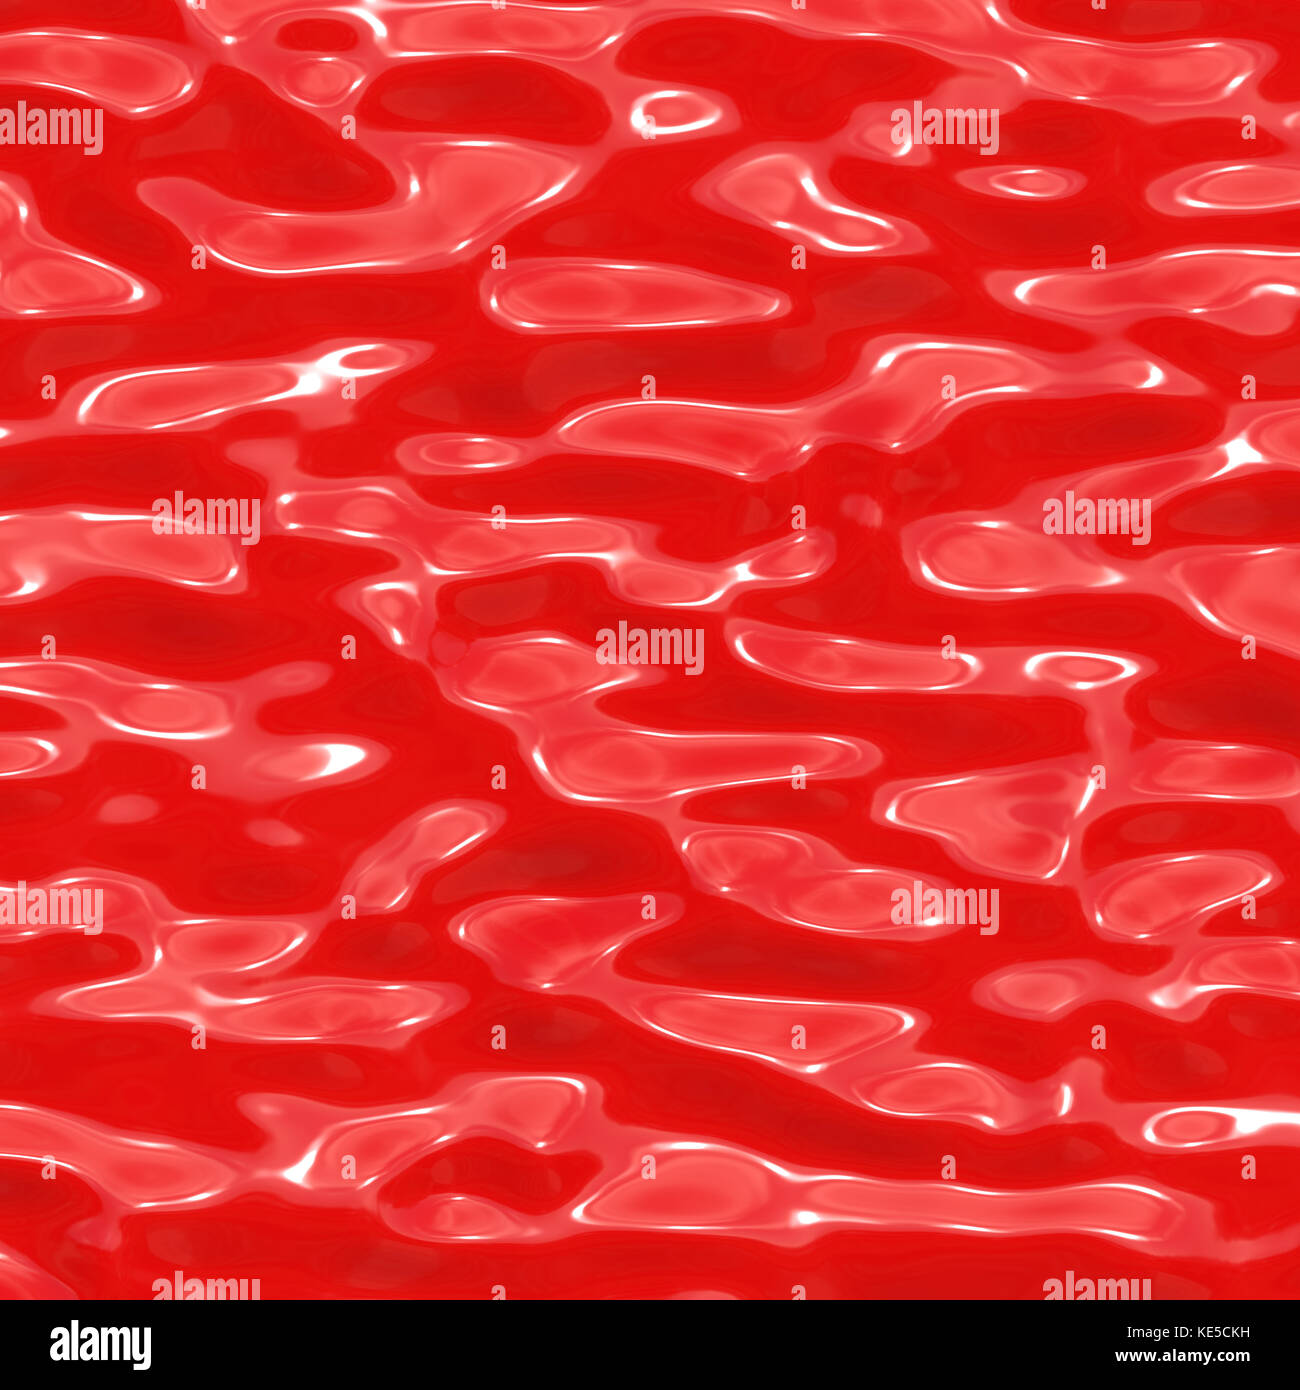 Melted red wax Stock Photo